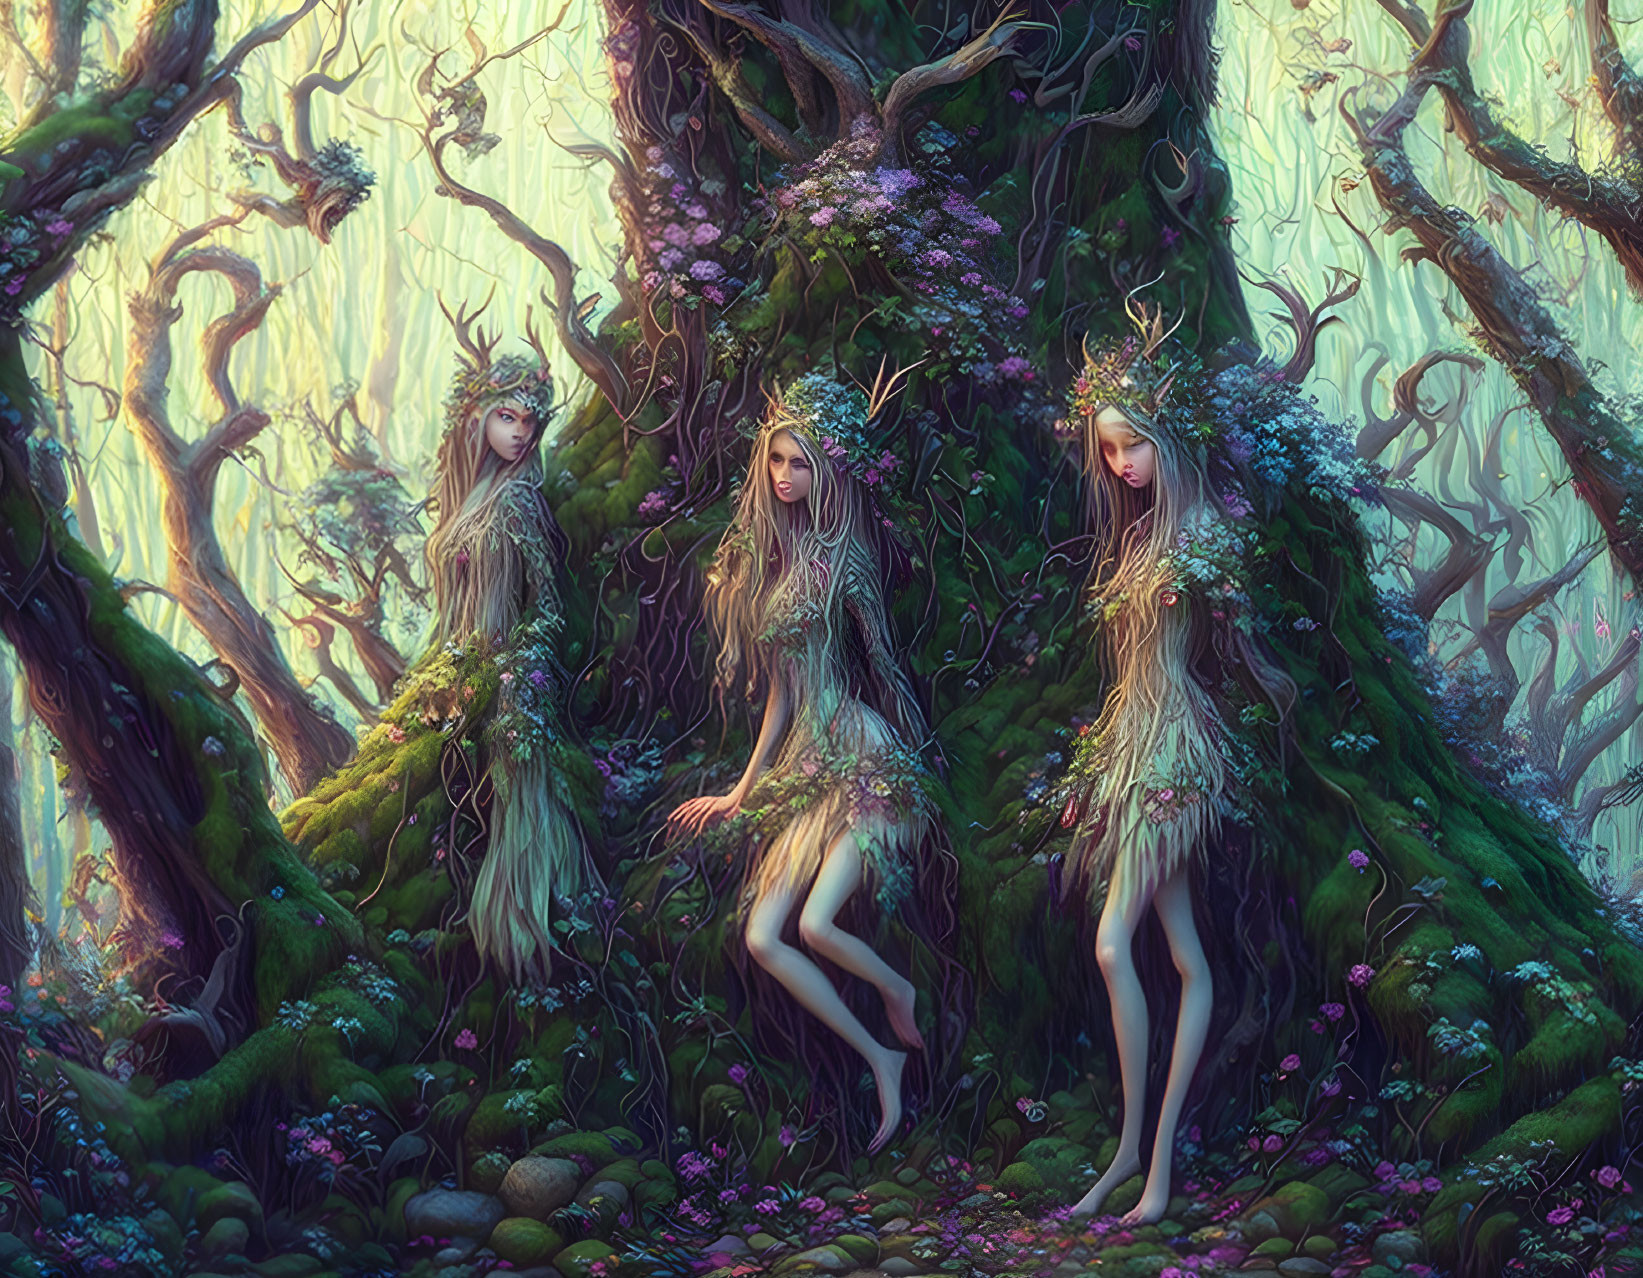 Ethereal female figures with floral crowns in enchanted forest